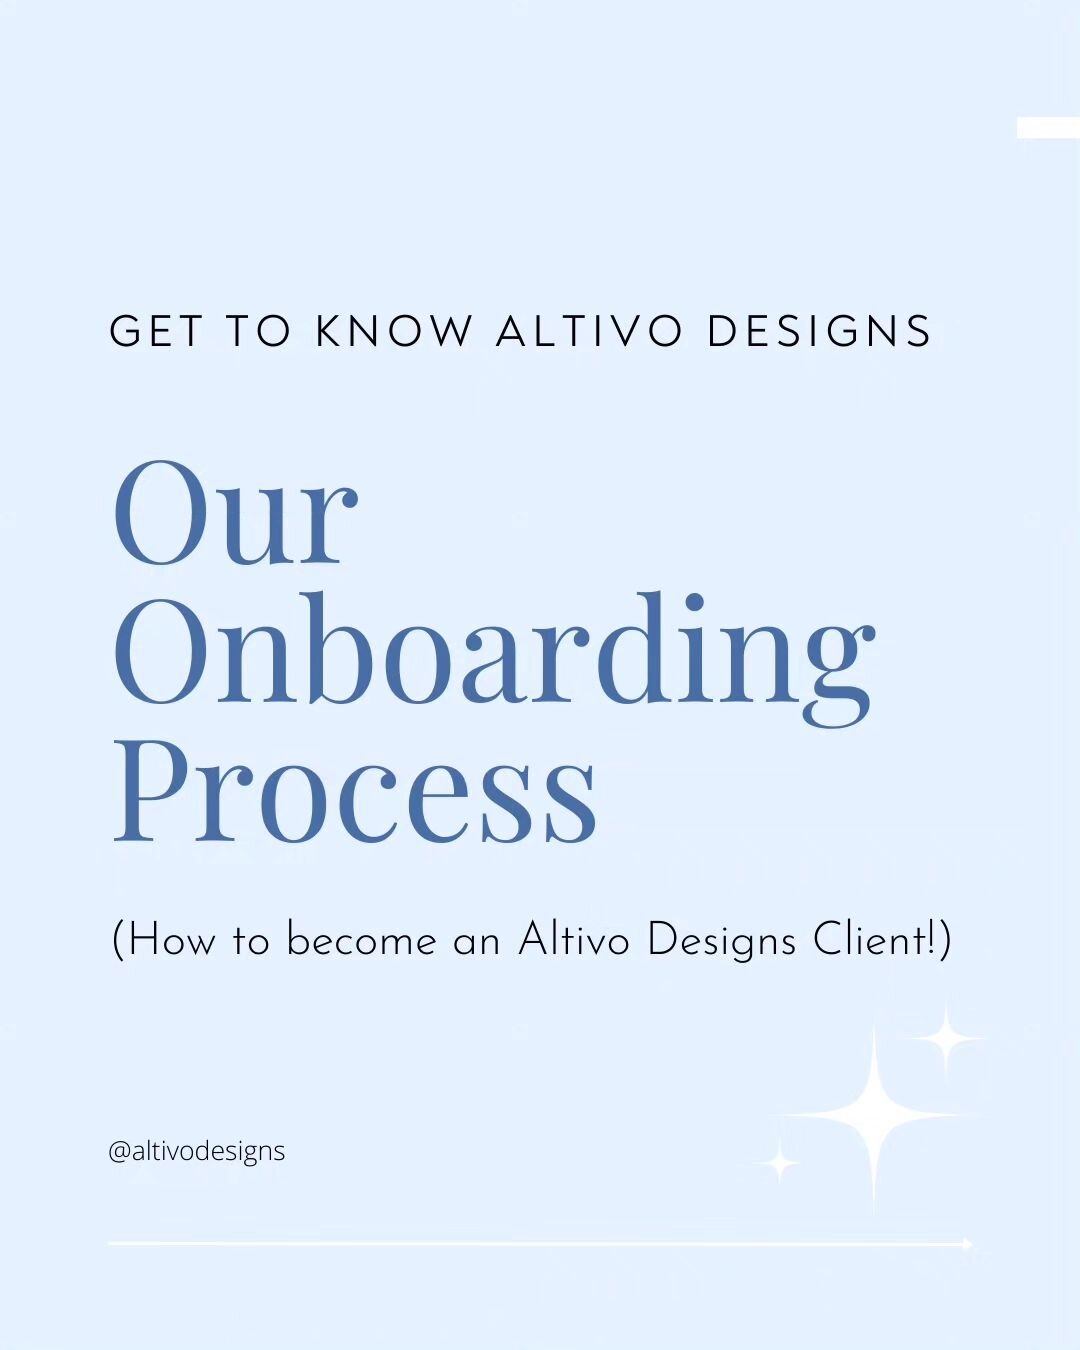 Today we're going to walk you through our Onboarding process (how to become an Altivo Designs Client). If you have any questions, please don't hesitate to reach out! 😊

#perthrenovation #perthinteriors #renovationswa #buildingjourneyperth #perthisok